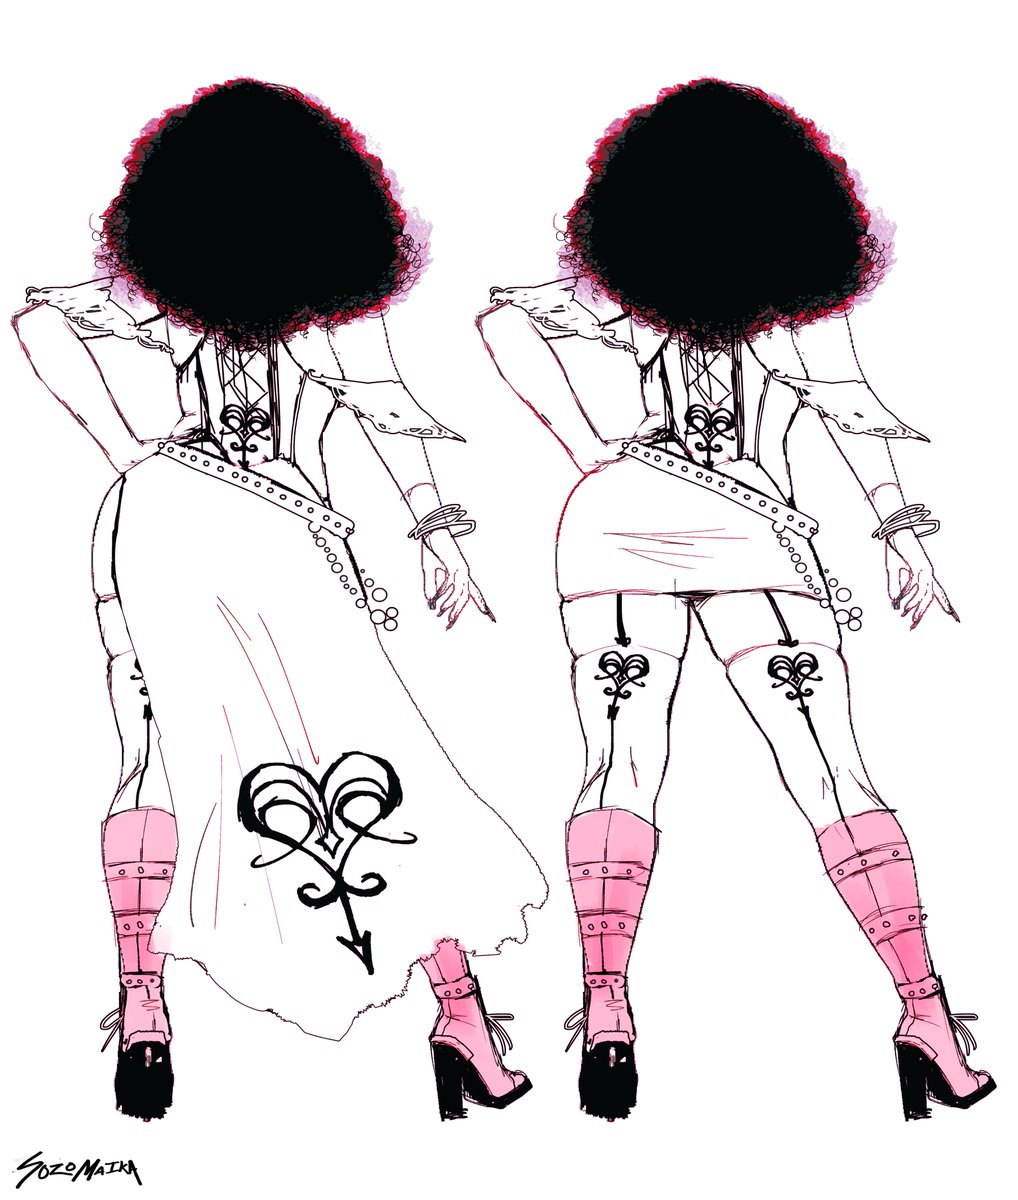 Some of my design contributions to the Erzulie character in Neil Gaiman's Sandman Universe. I was asked to depict a beautiful woman of color wearing clothes inspired by alternative fashion.These didn't end up being the final version but I put love into them nonetheless. 